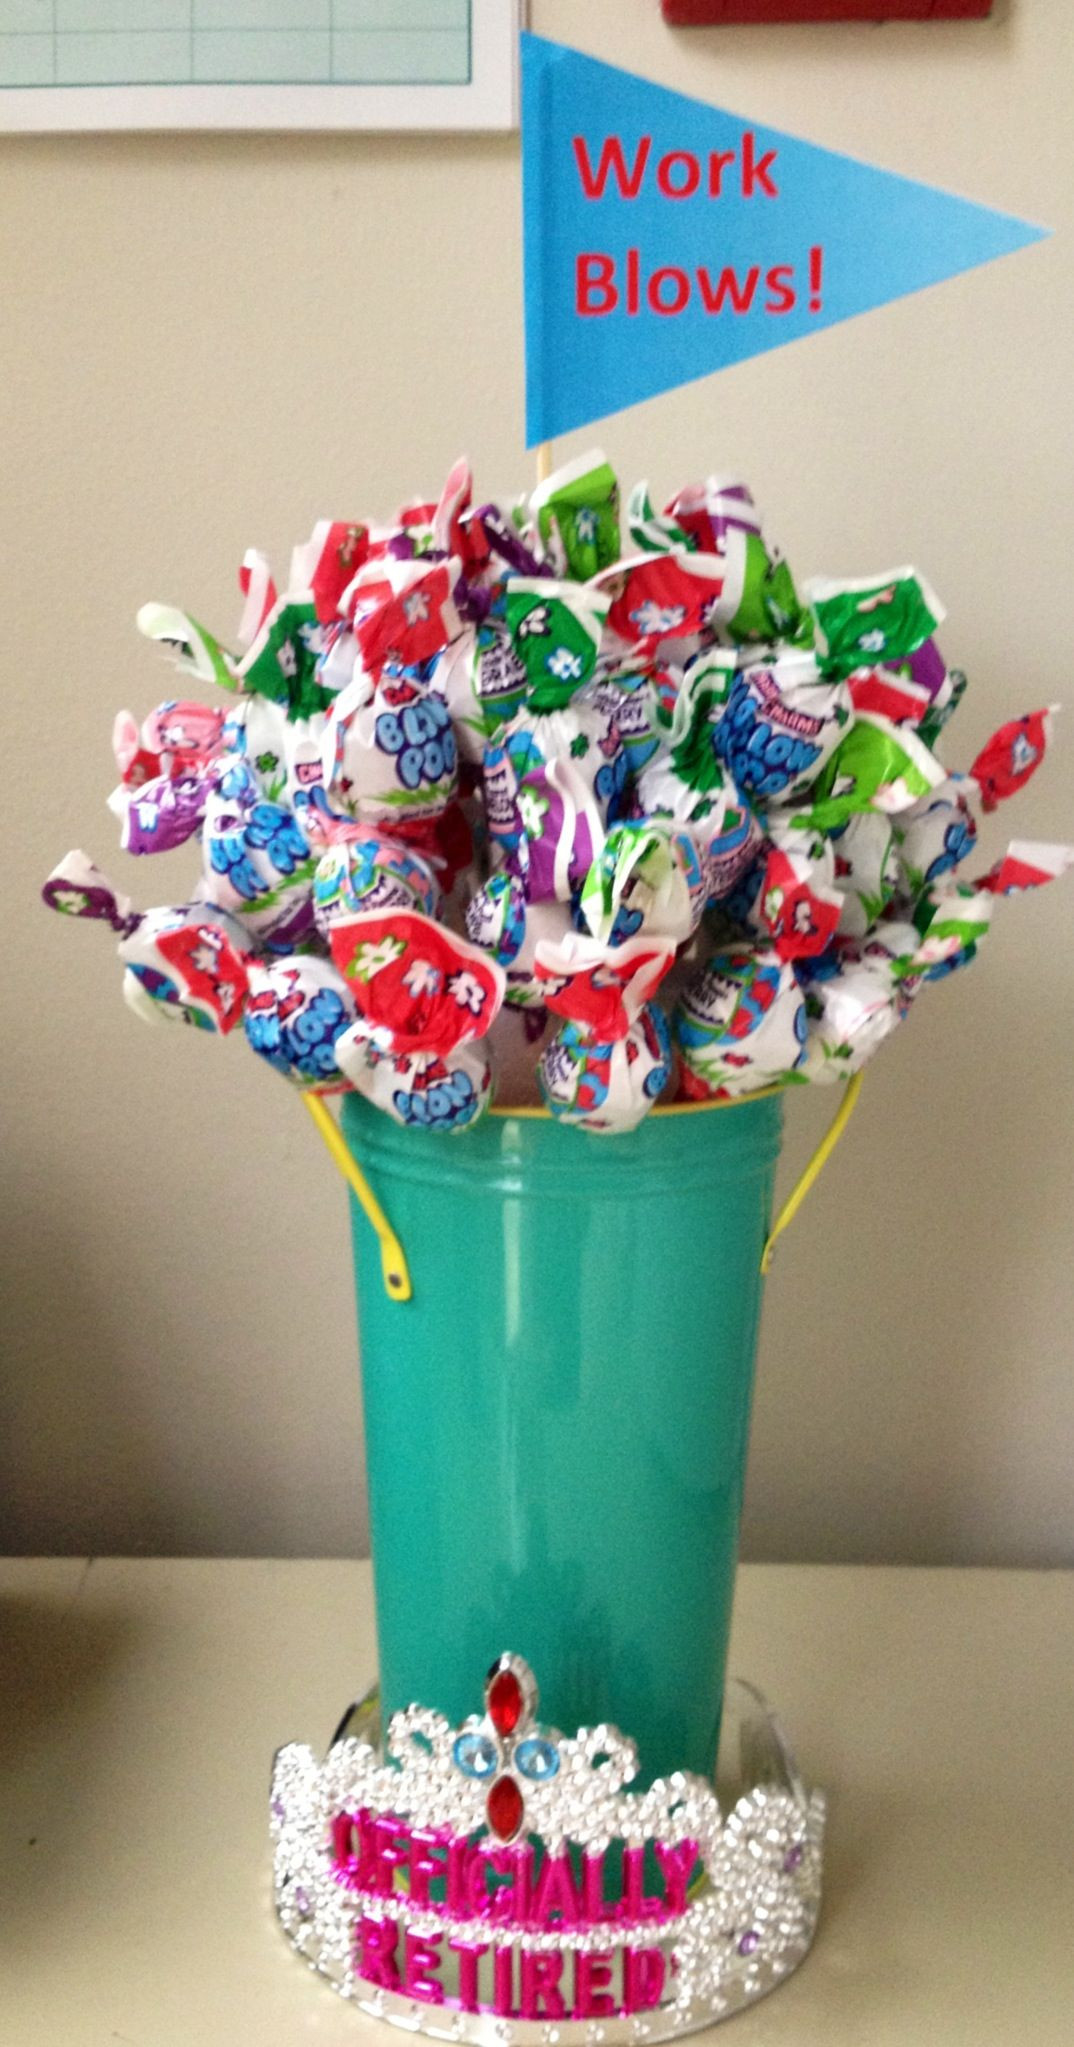 Retirement Party Gifts Ideas
 Retirement t Blow pops and a "work blows" sign